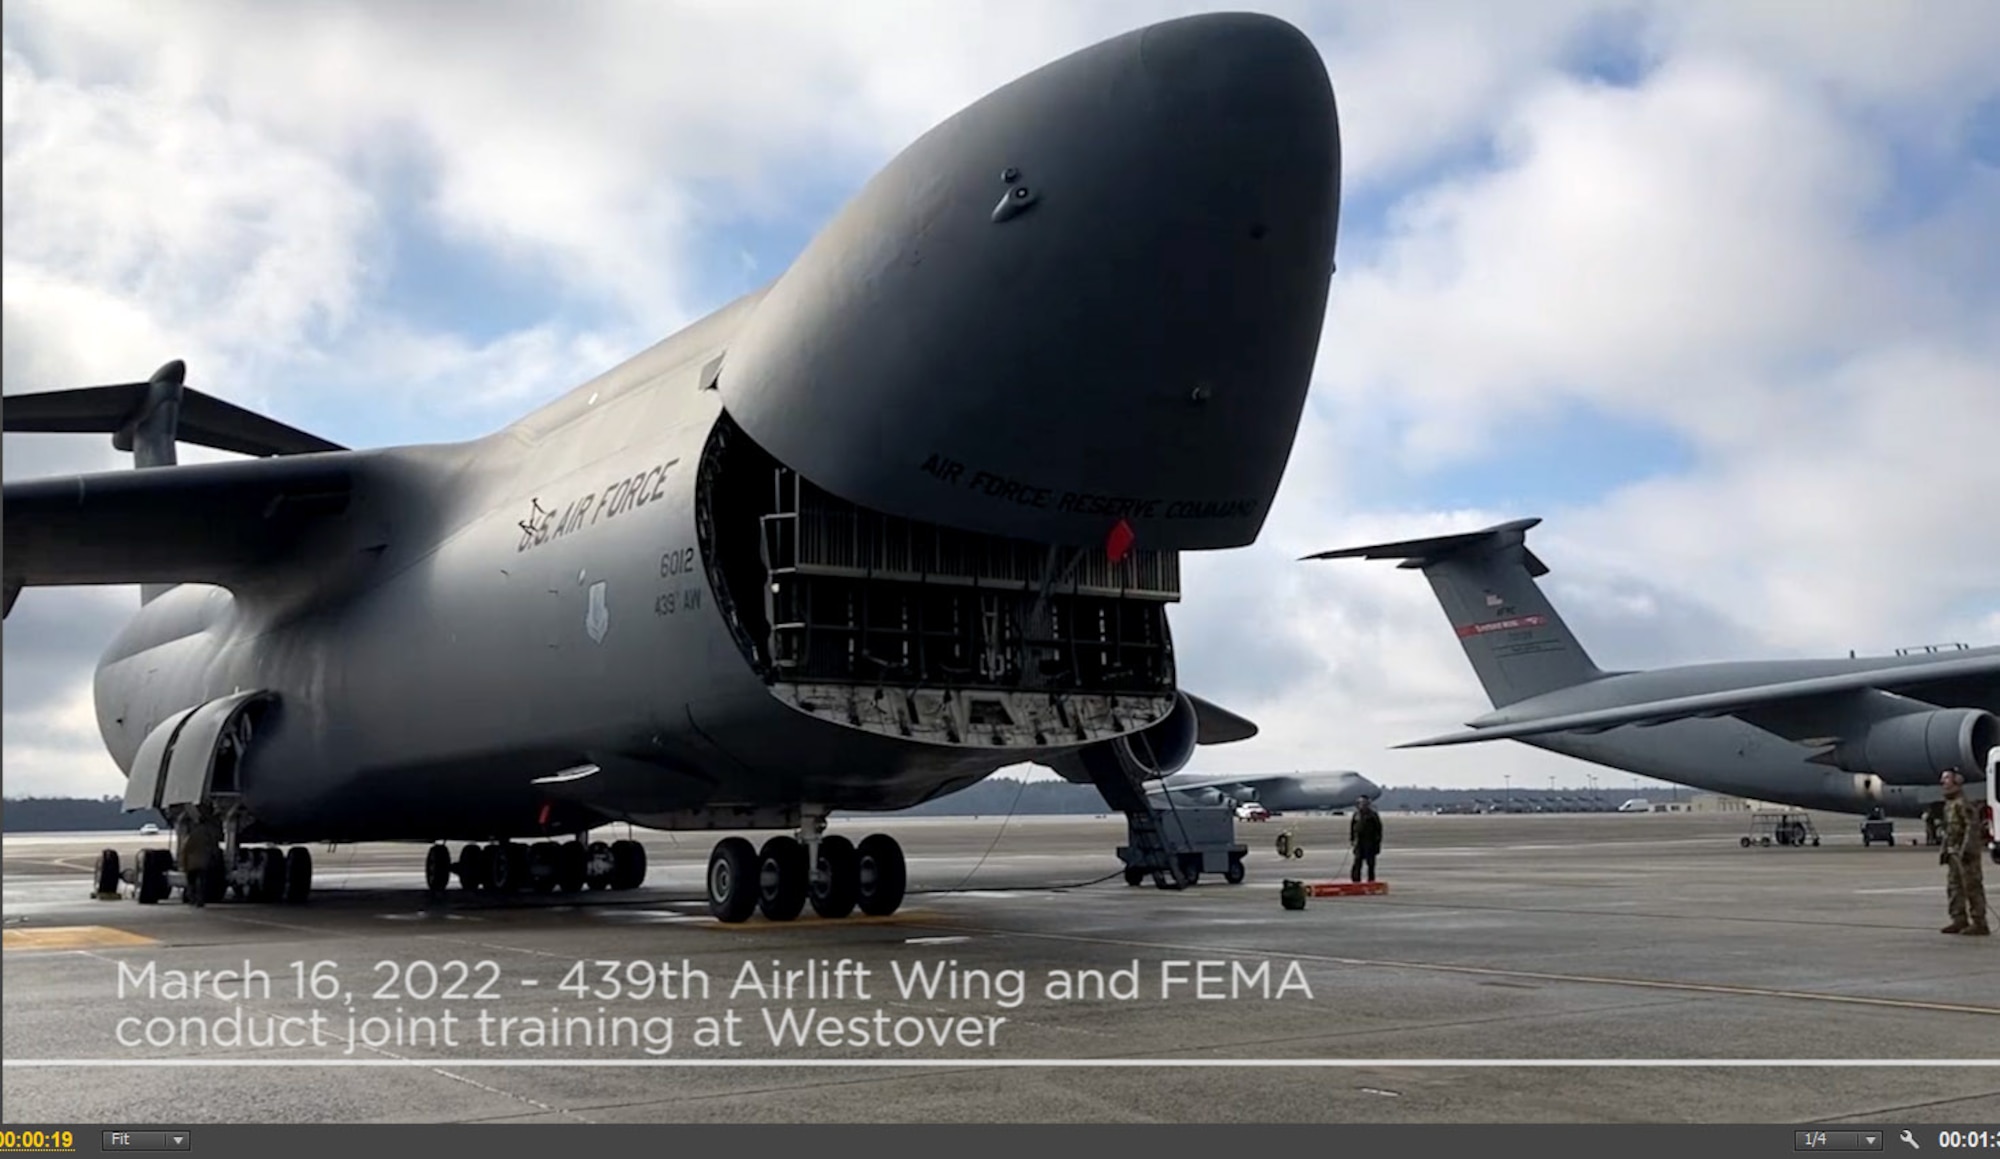 Timelapse of Westover Aerial Porters, Air Crew and FEMA practice loading vehicles on C-5M